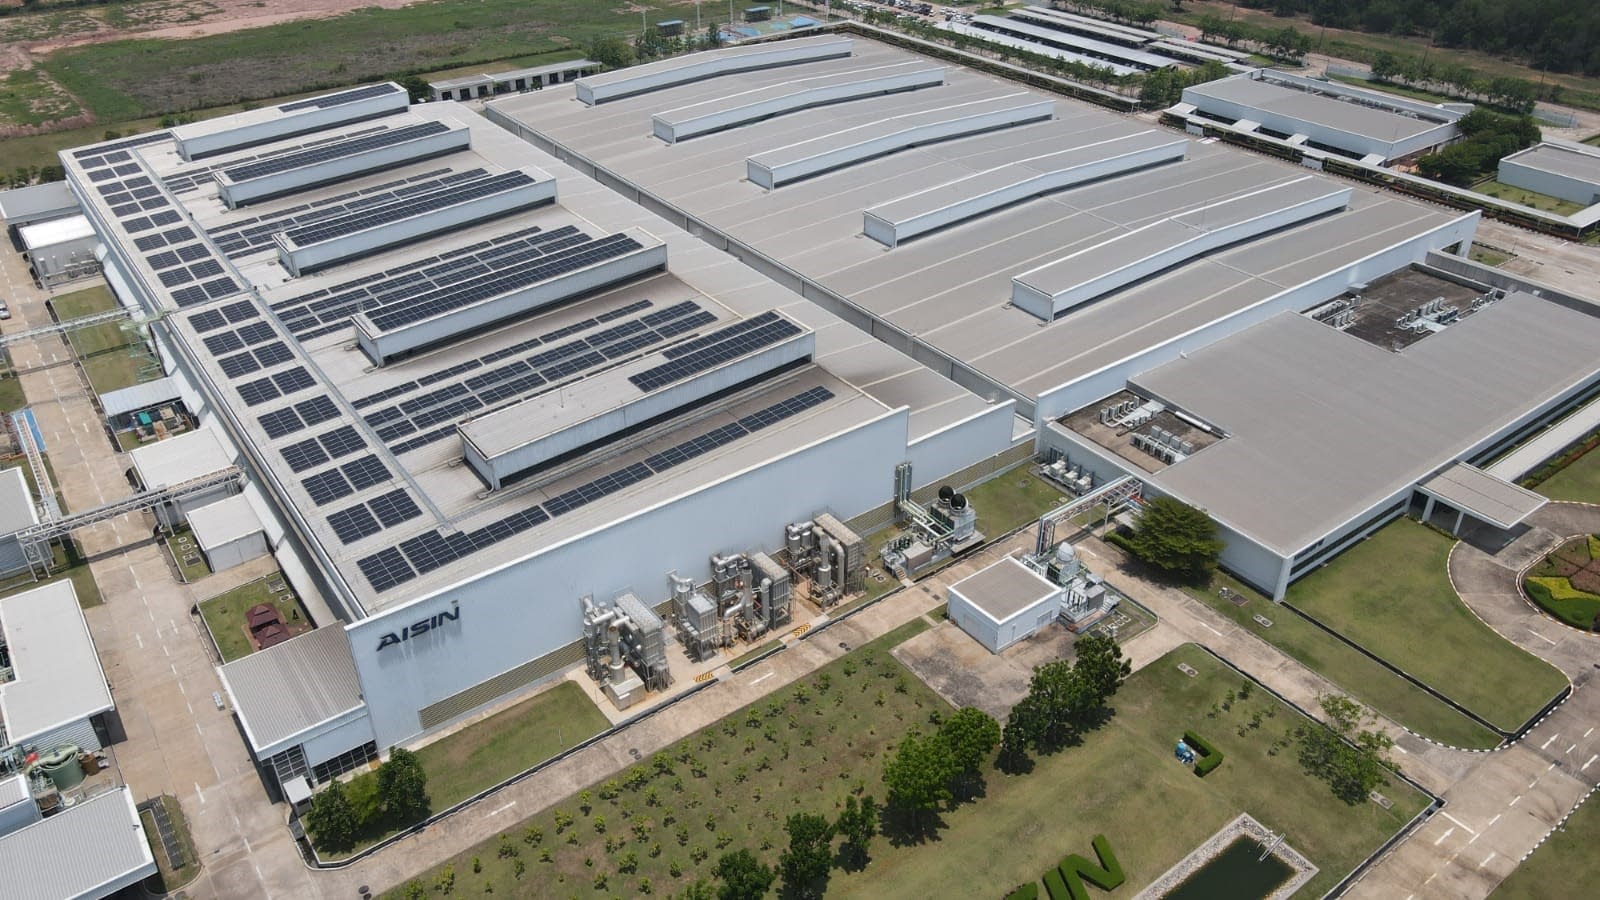 Aisin Thai Automotive Casting Co., Ltd. (Aisin Group) and Constant Energy / Shizen Energy execute a Corporate PPA to expand its current solar rooftop operations to 3.7MW